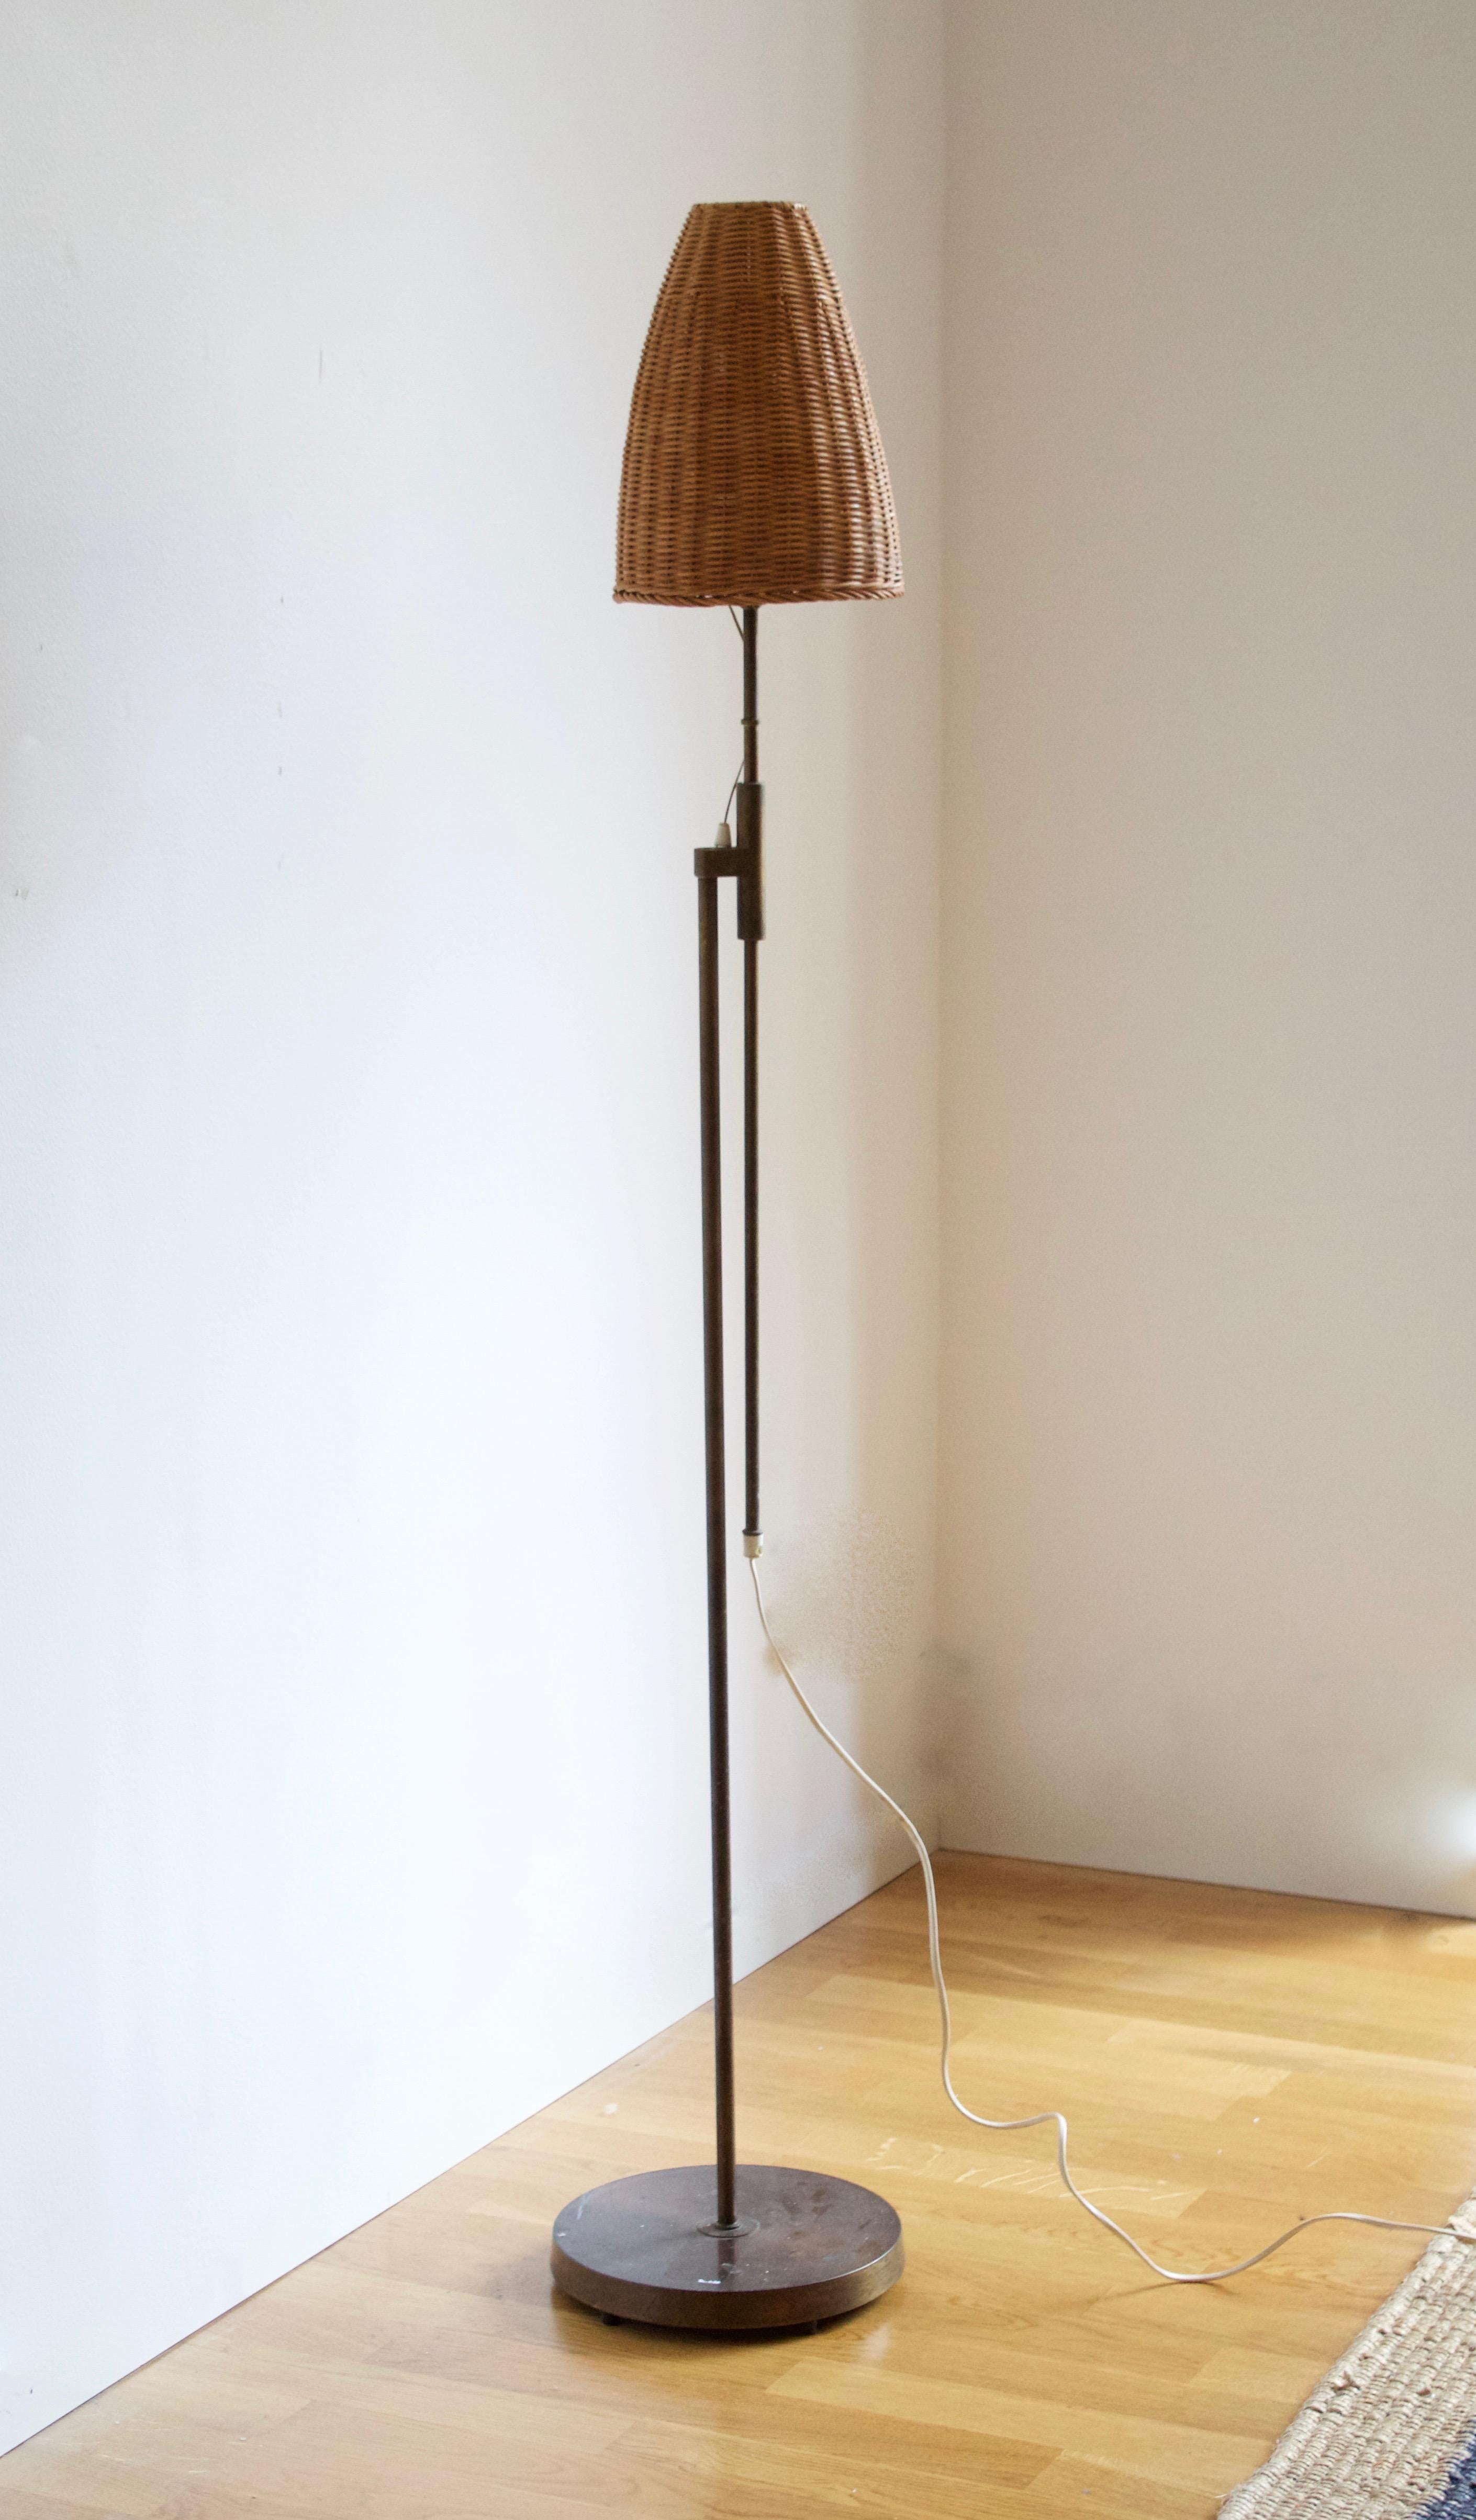 An adjustable floor lamp. Produced by Falkenbergs Belysning. Stamped

With an assorted vintage rattan lampshade.

Other designers of the period include Hans Bergström, Hans-Agne Jacobson, Alvar Aalto, Josef Frank, and Paavo Tynell.